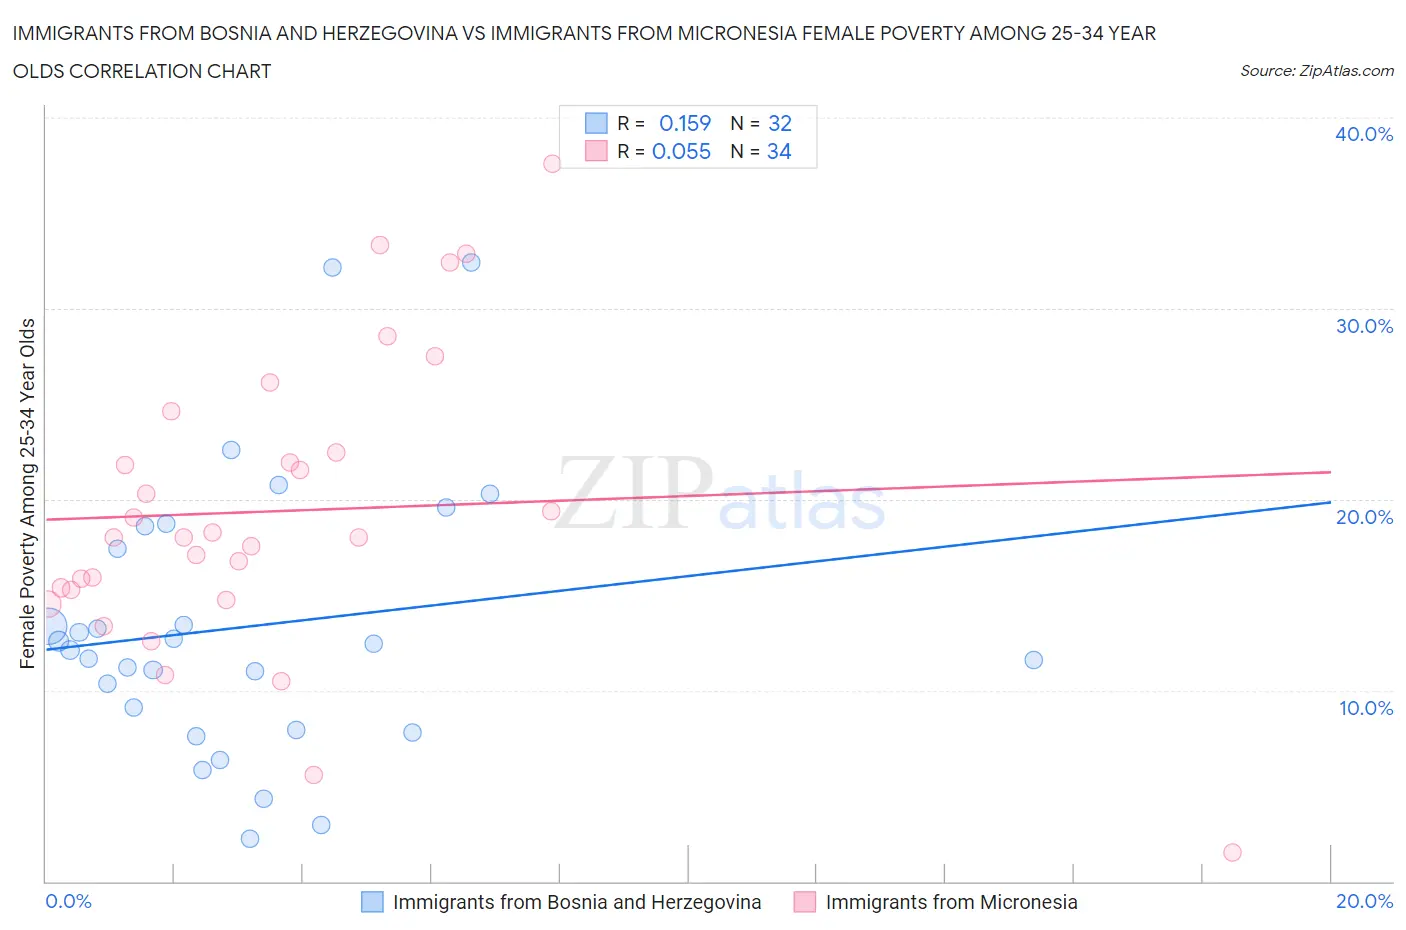 Immigrants from Bosnia and Herzegovina vs Immigrants from Micronesia Female Poverty Among 25-34 Year Olds